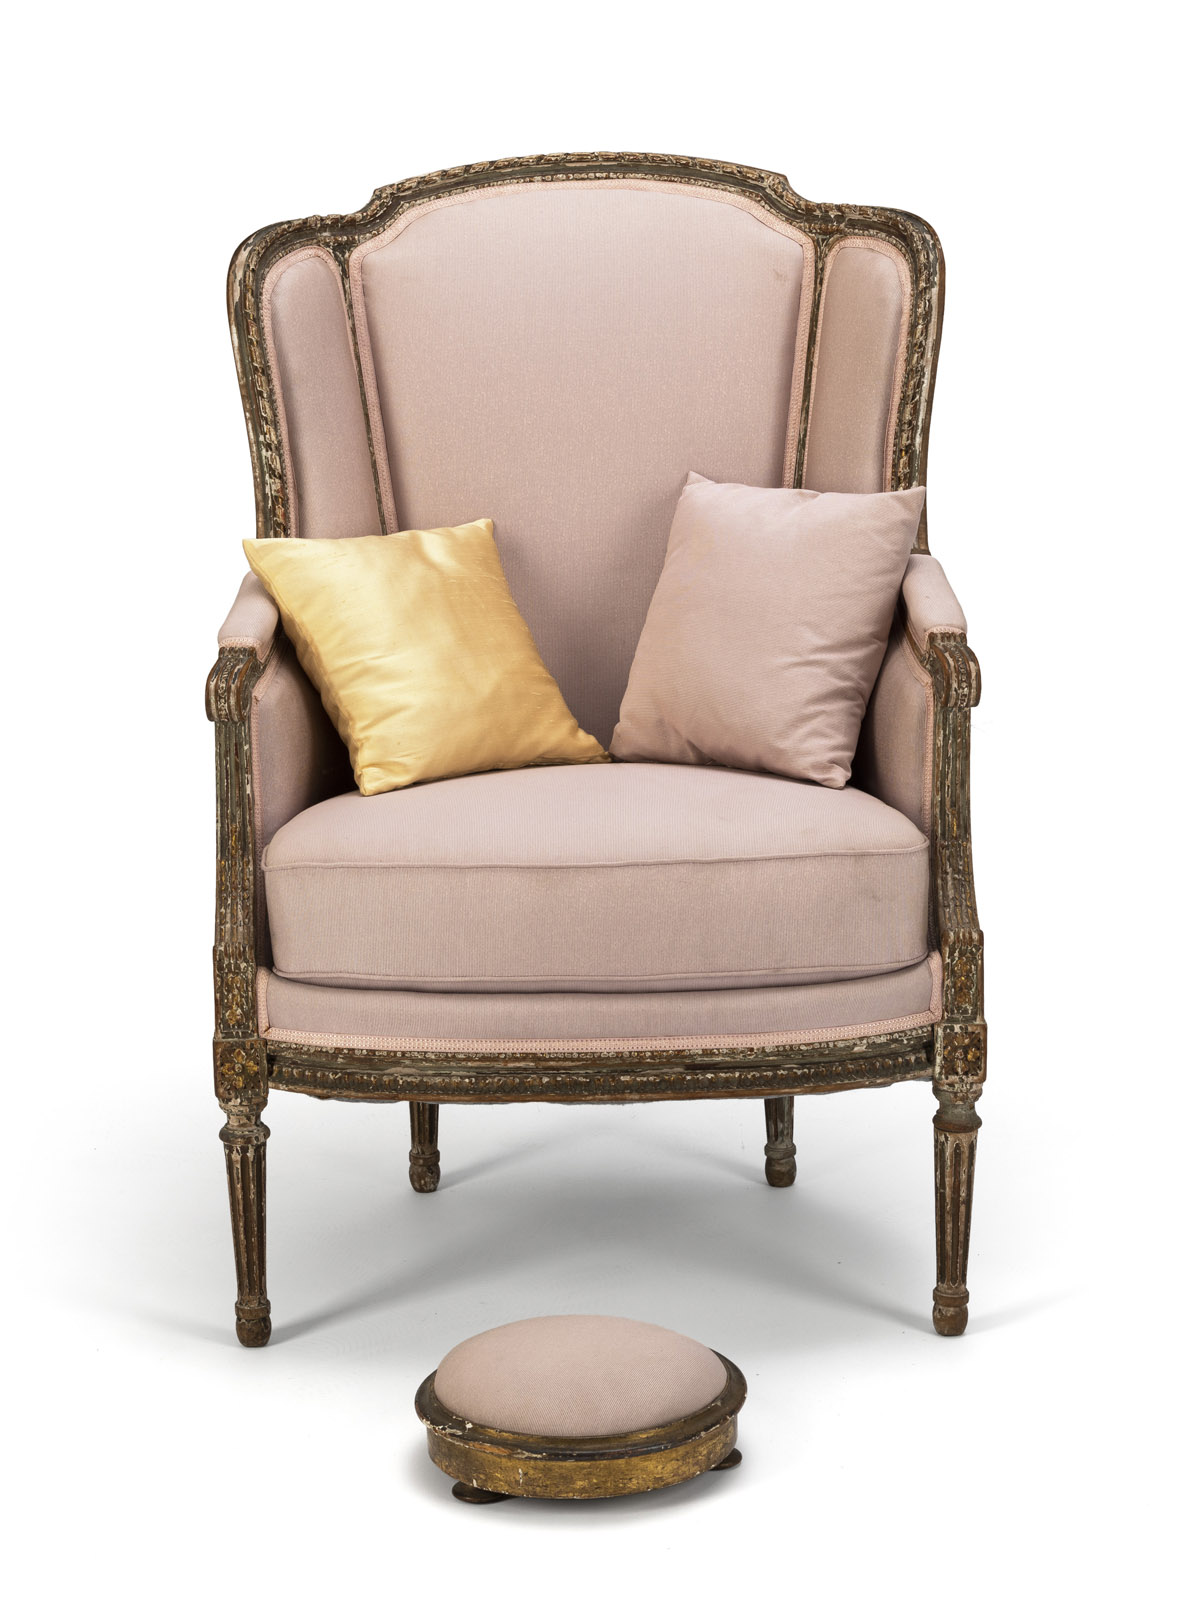 A LOUIS XVI STYLE POLYCHROME AND PARCEL- GILT PAINTED FAUTEUIL - Image 2 of 5